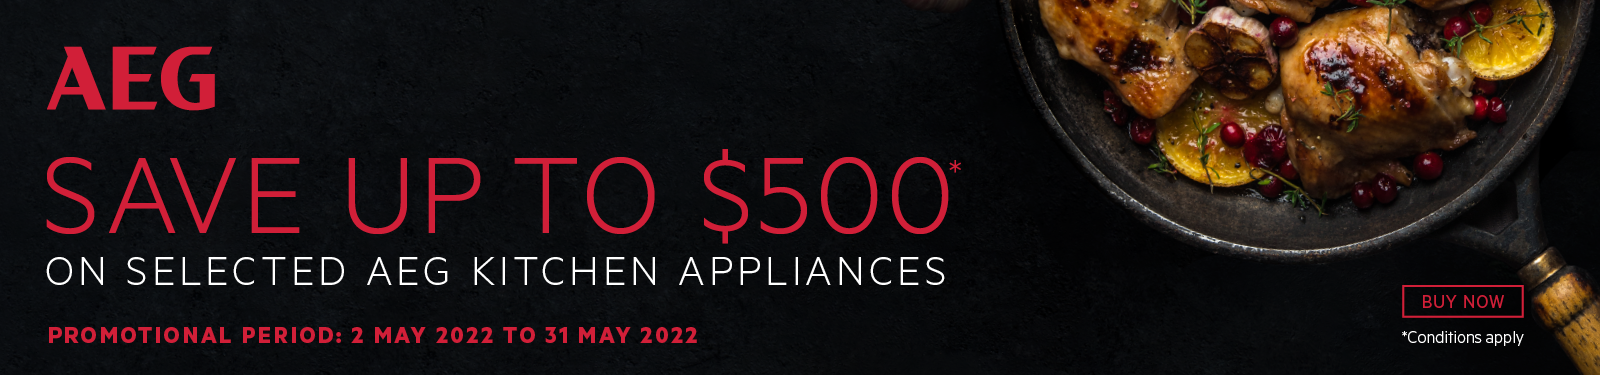 Save up to $500 on selected AEG Kitchen Appliances